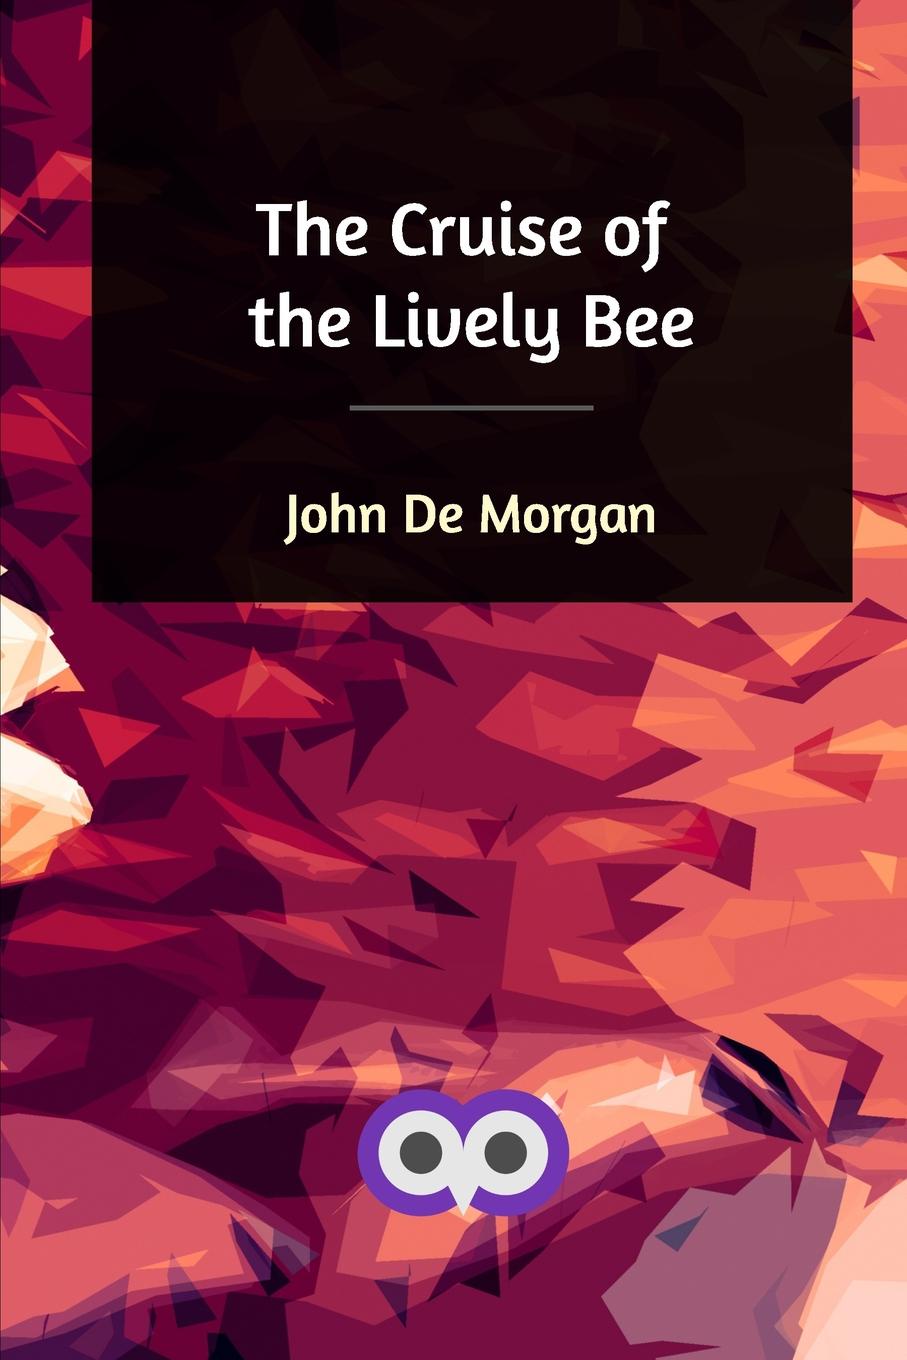 The Cruise of the Lively Bee